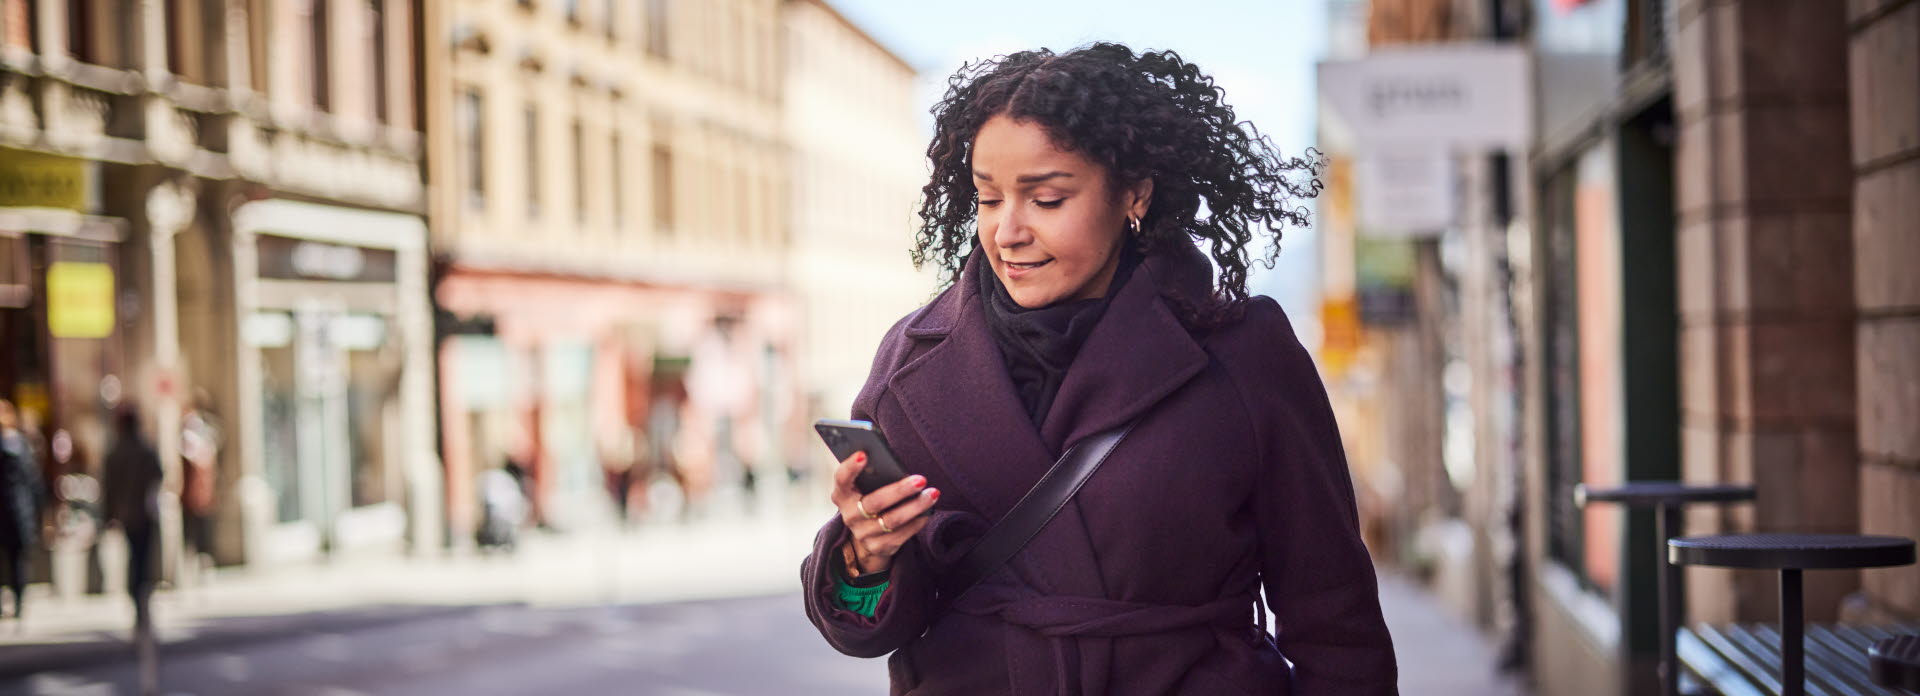 Woman walking in the city with a phone in her hand. ITAB creating seamless online and offline consumer journeys.